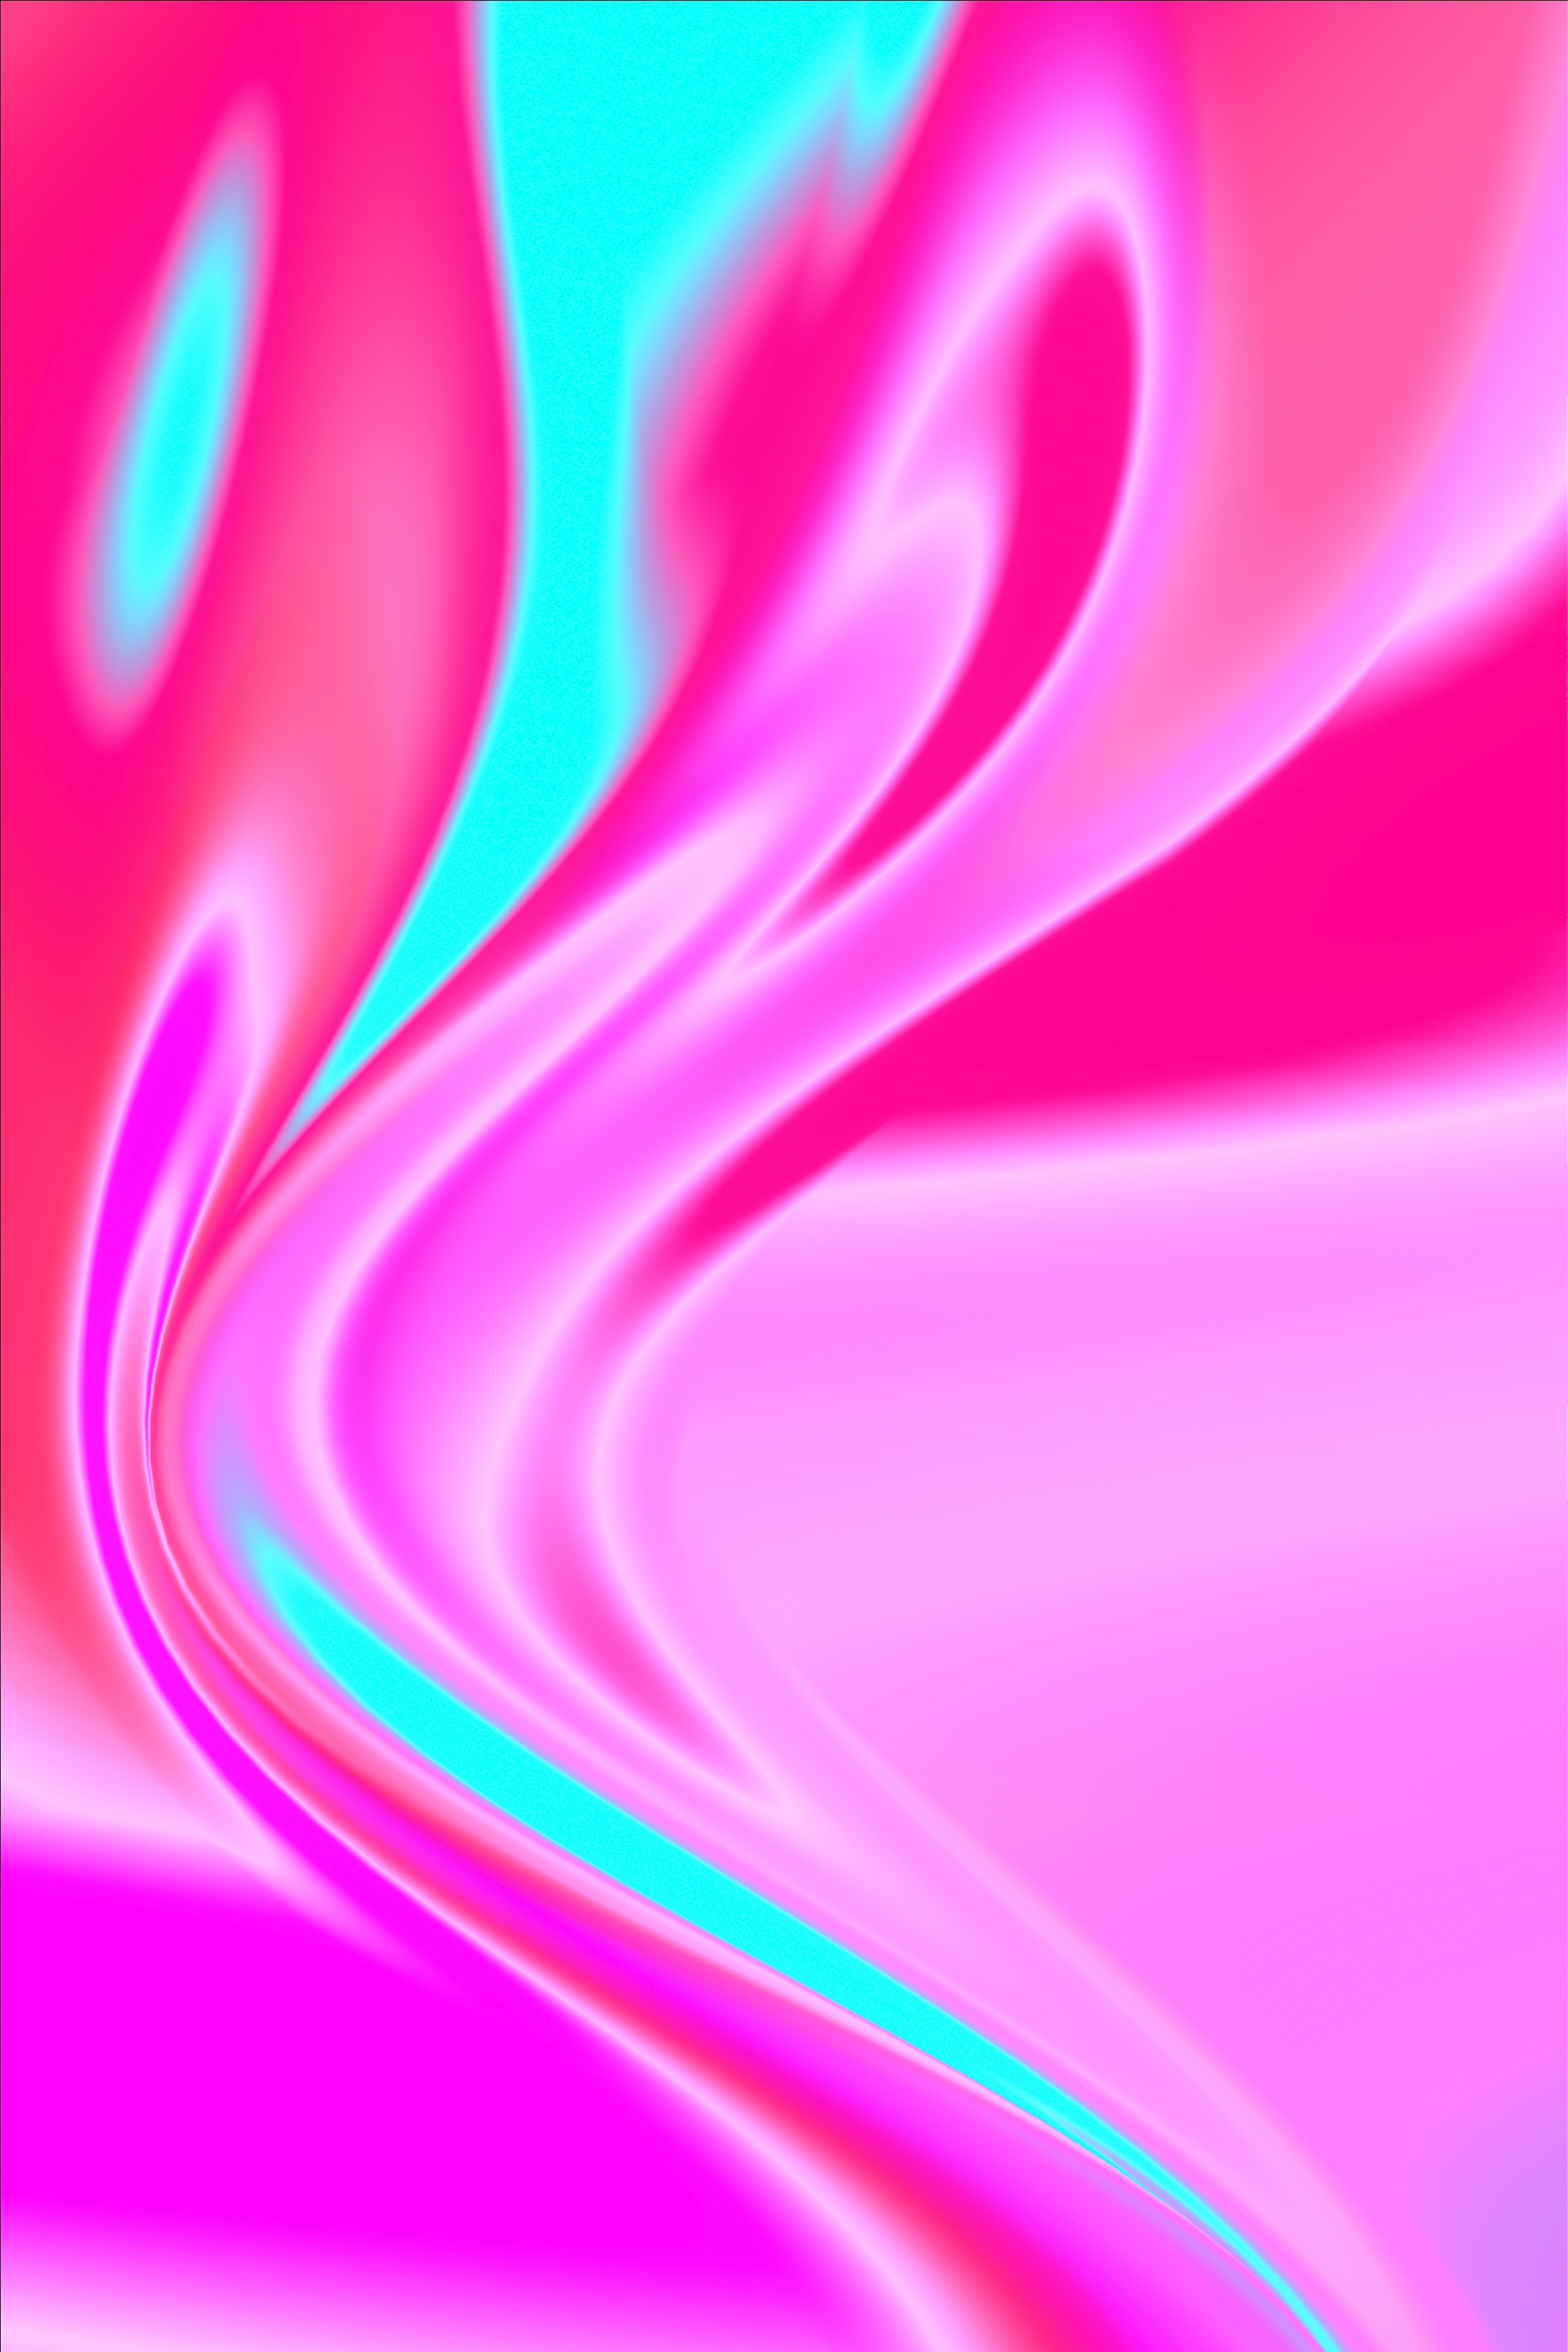 wavy, mixing, pink, raised, abstract, blue, relief